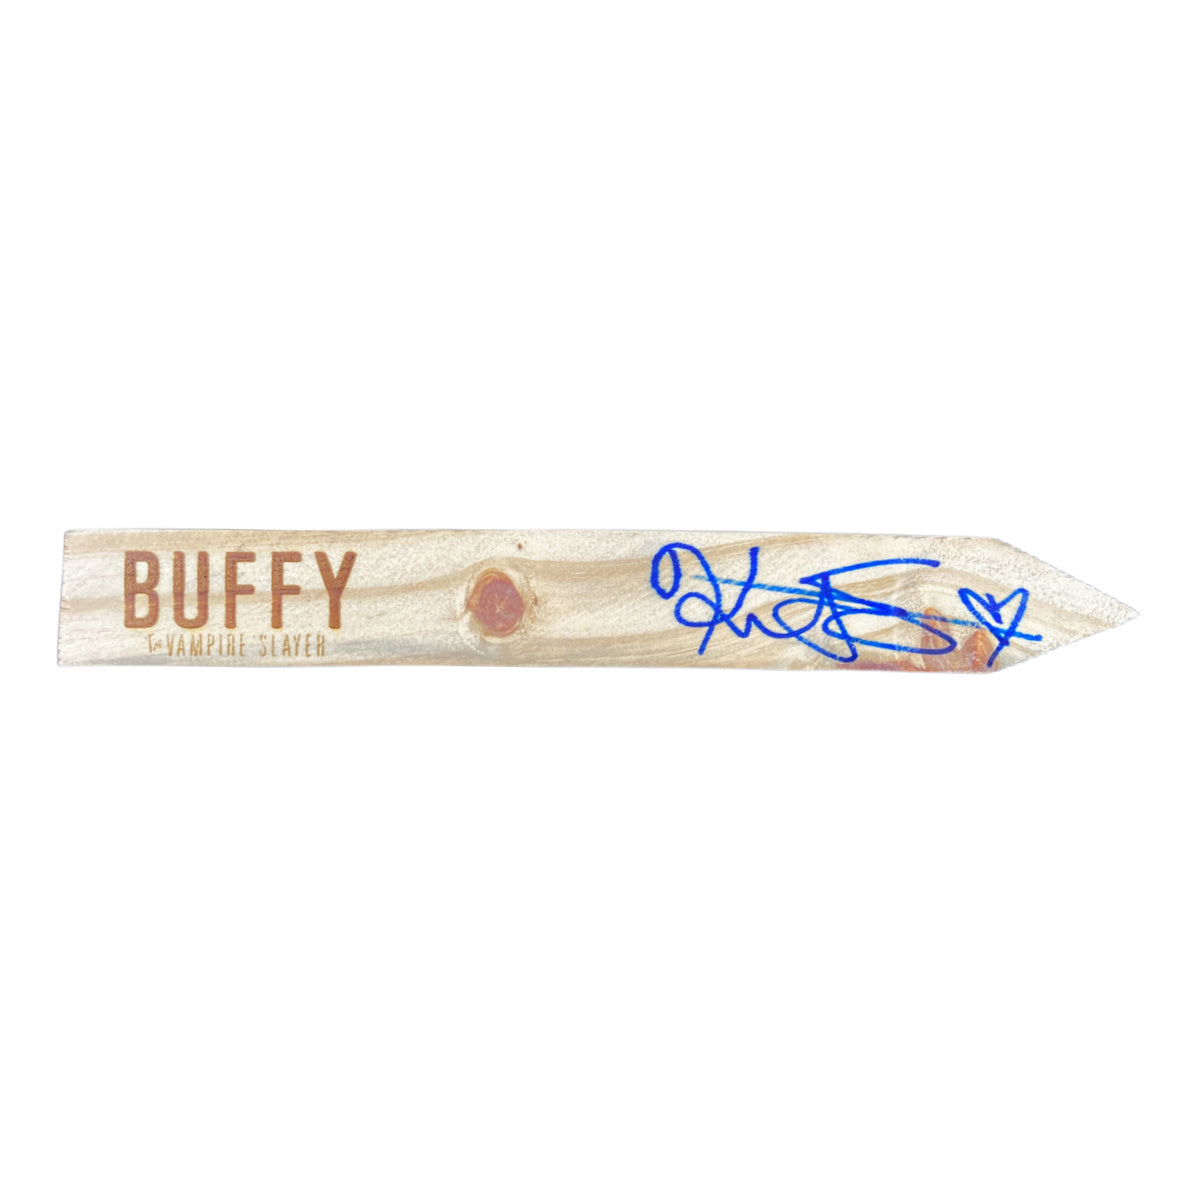 Kristy Swanson Autographed Buffy The Vampire Slayer Signed Wooden Stake - JSA COA